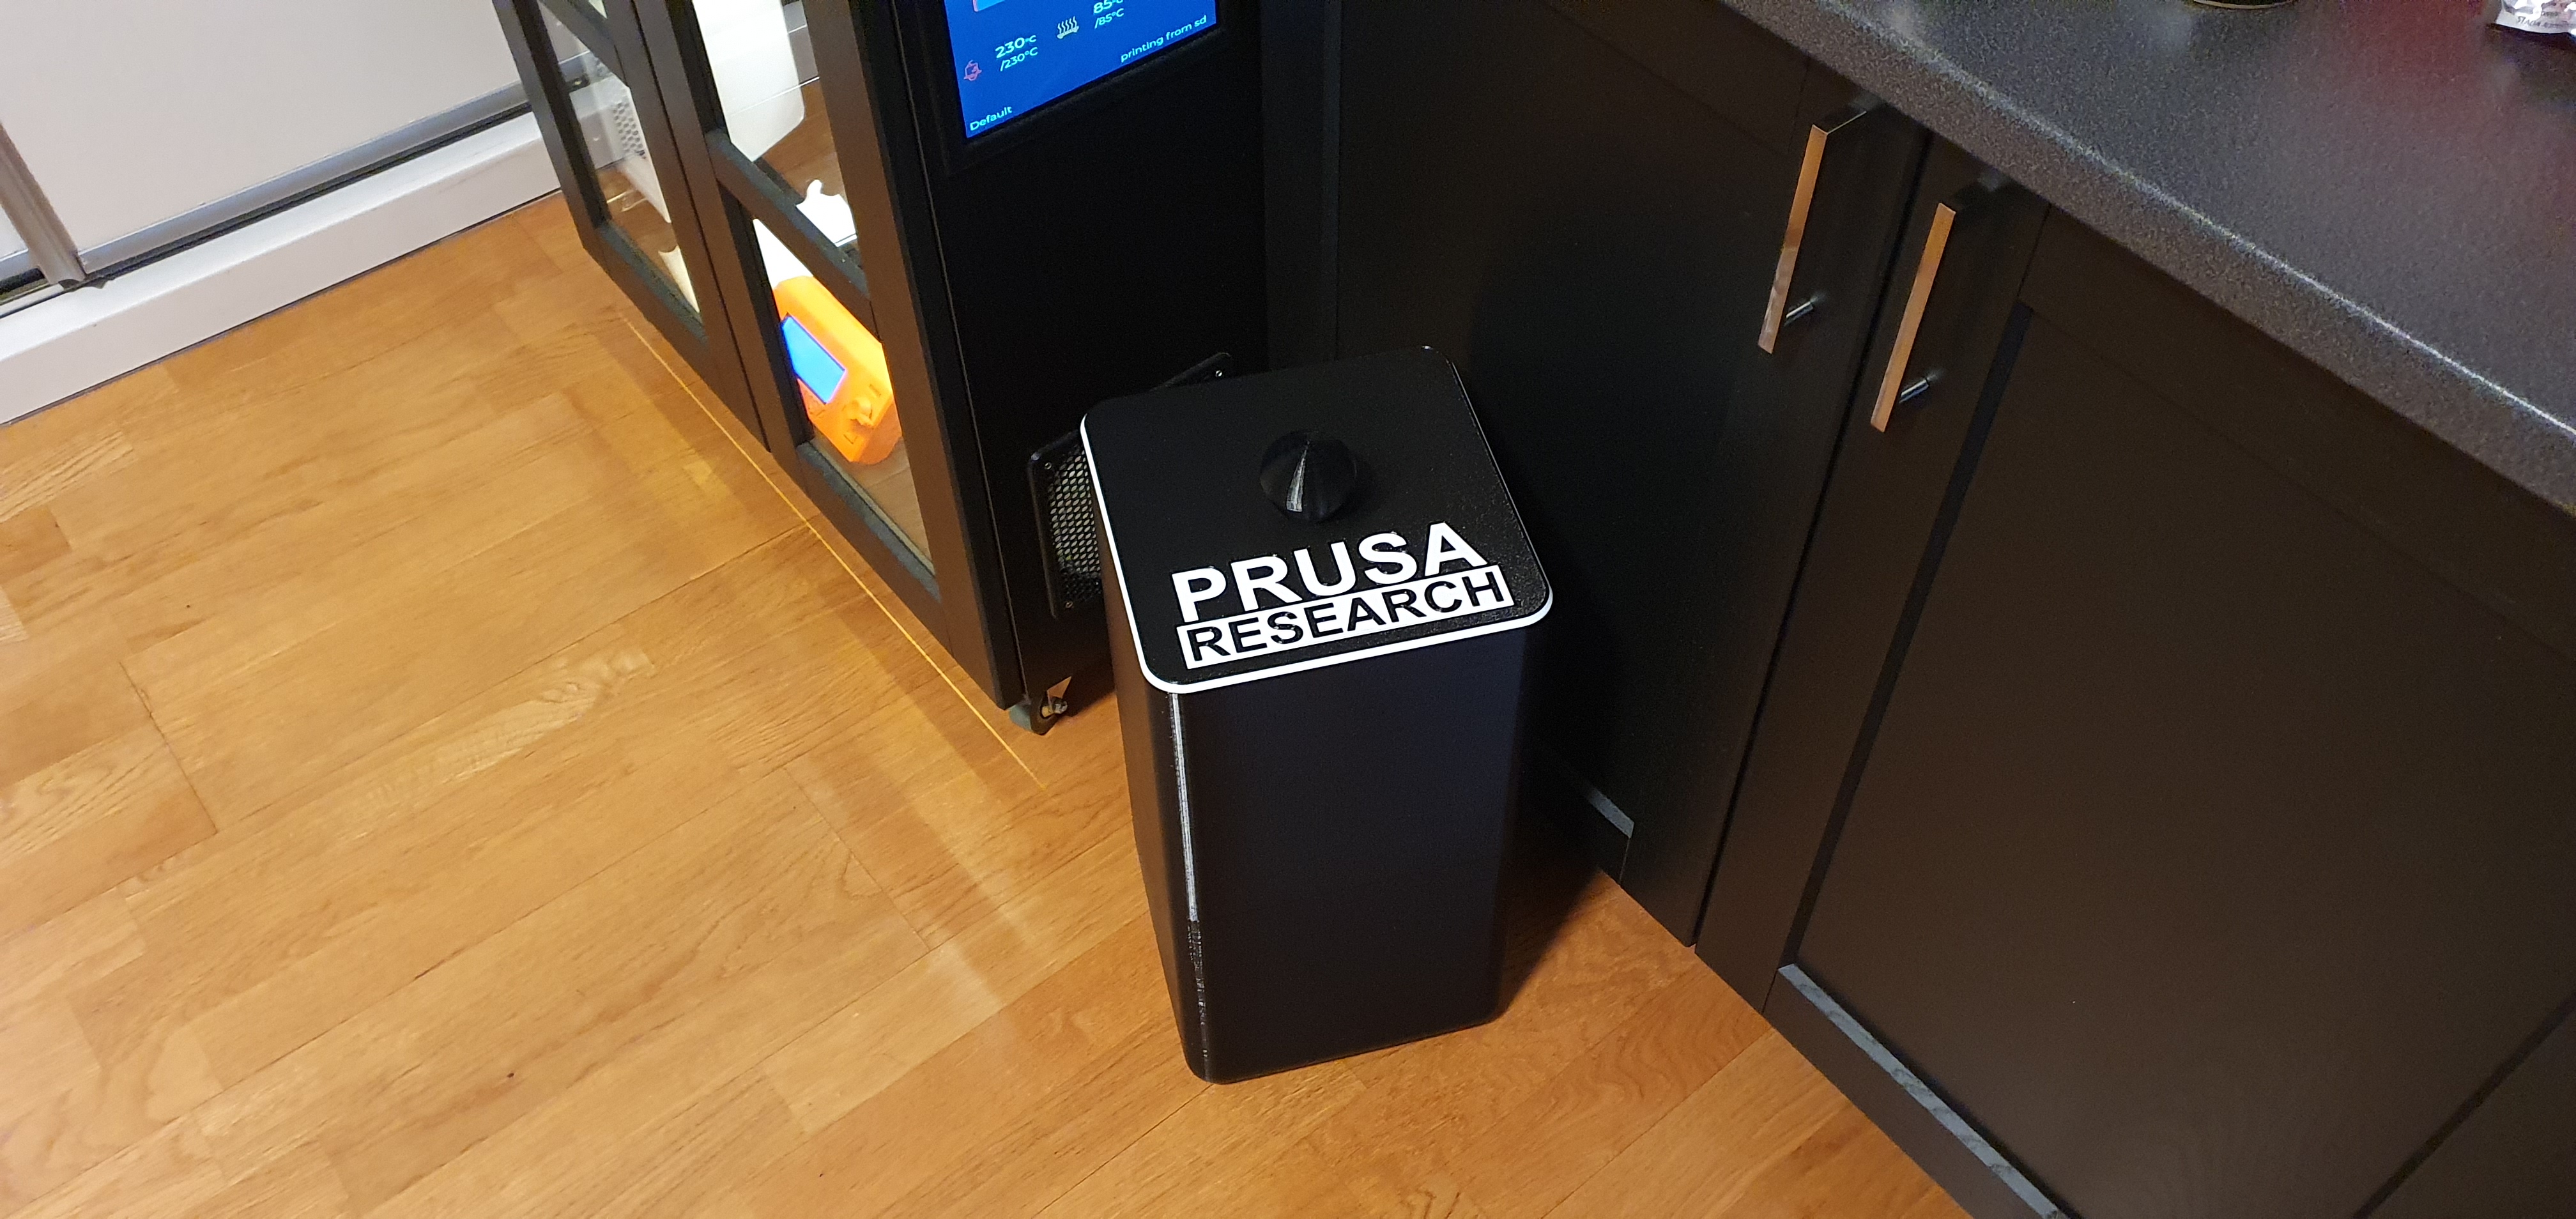 Prusa Research Trash can